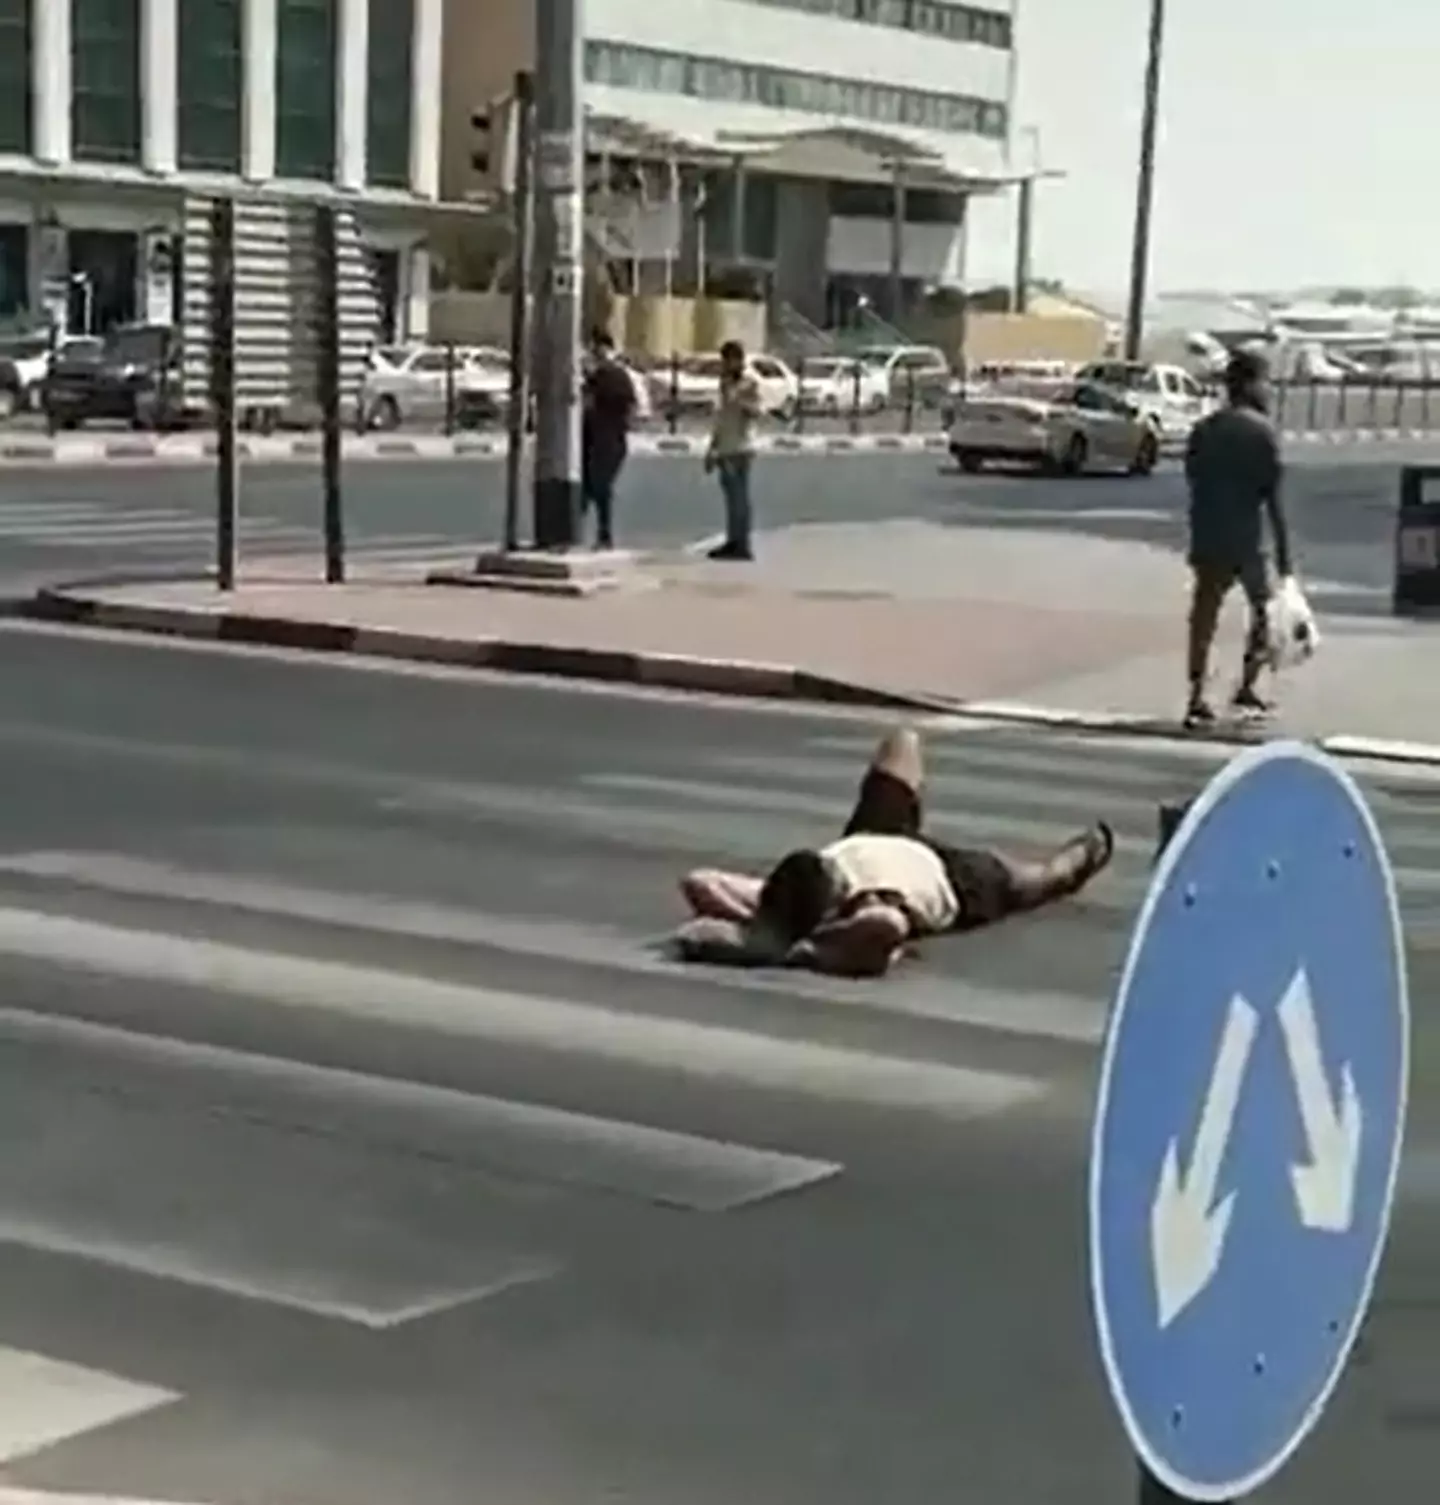 The man's TikTok video showed him appearing to sleep in the middle of a busy road.